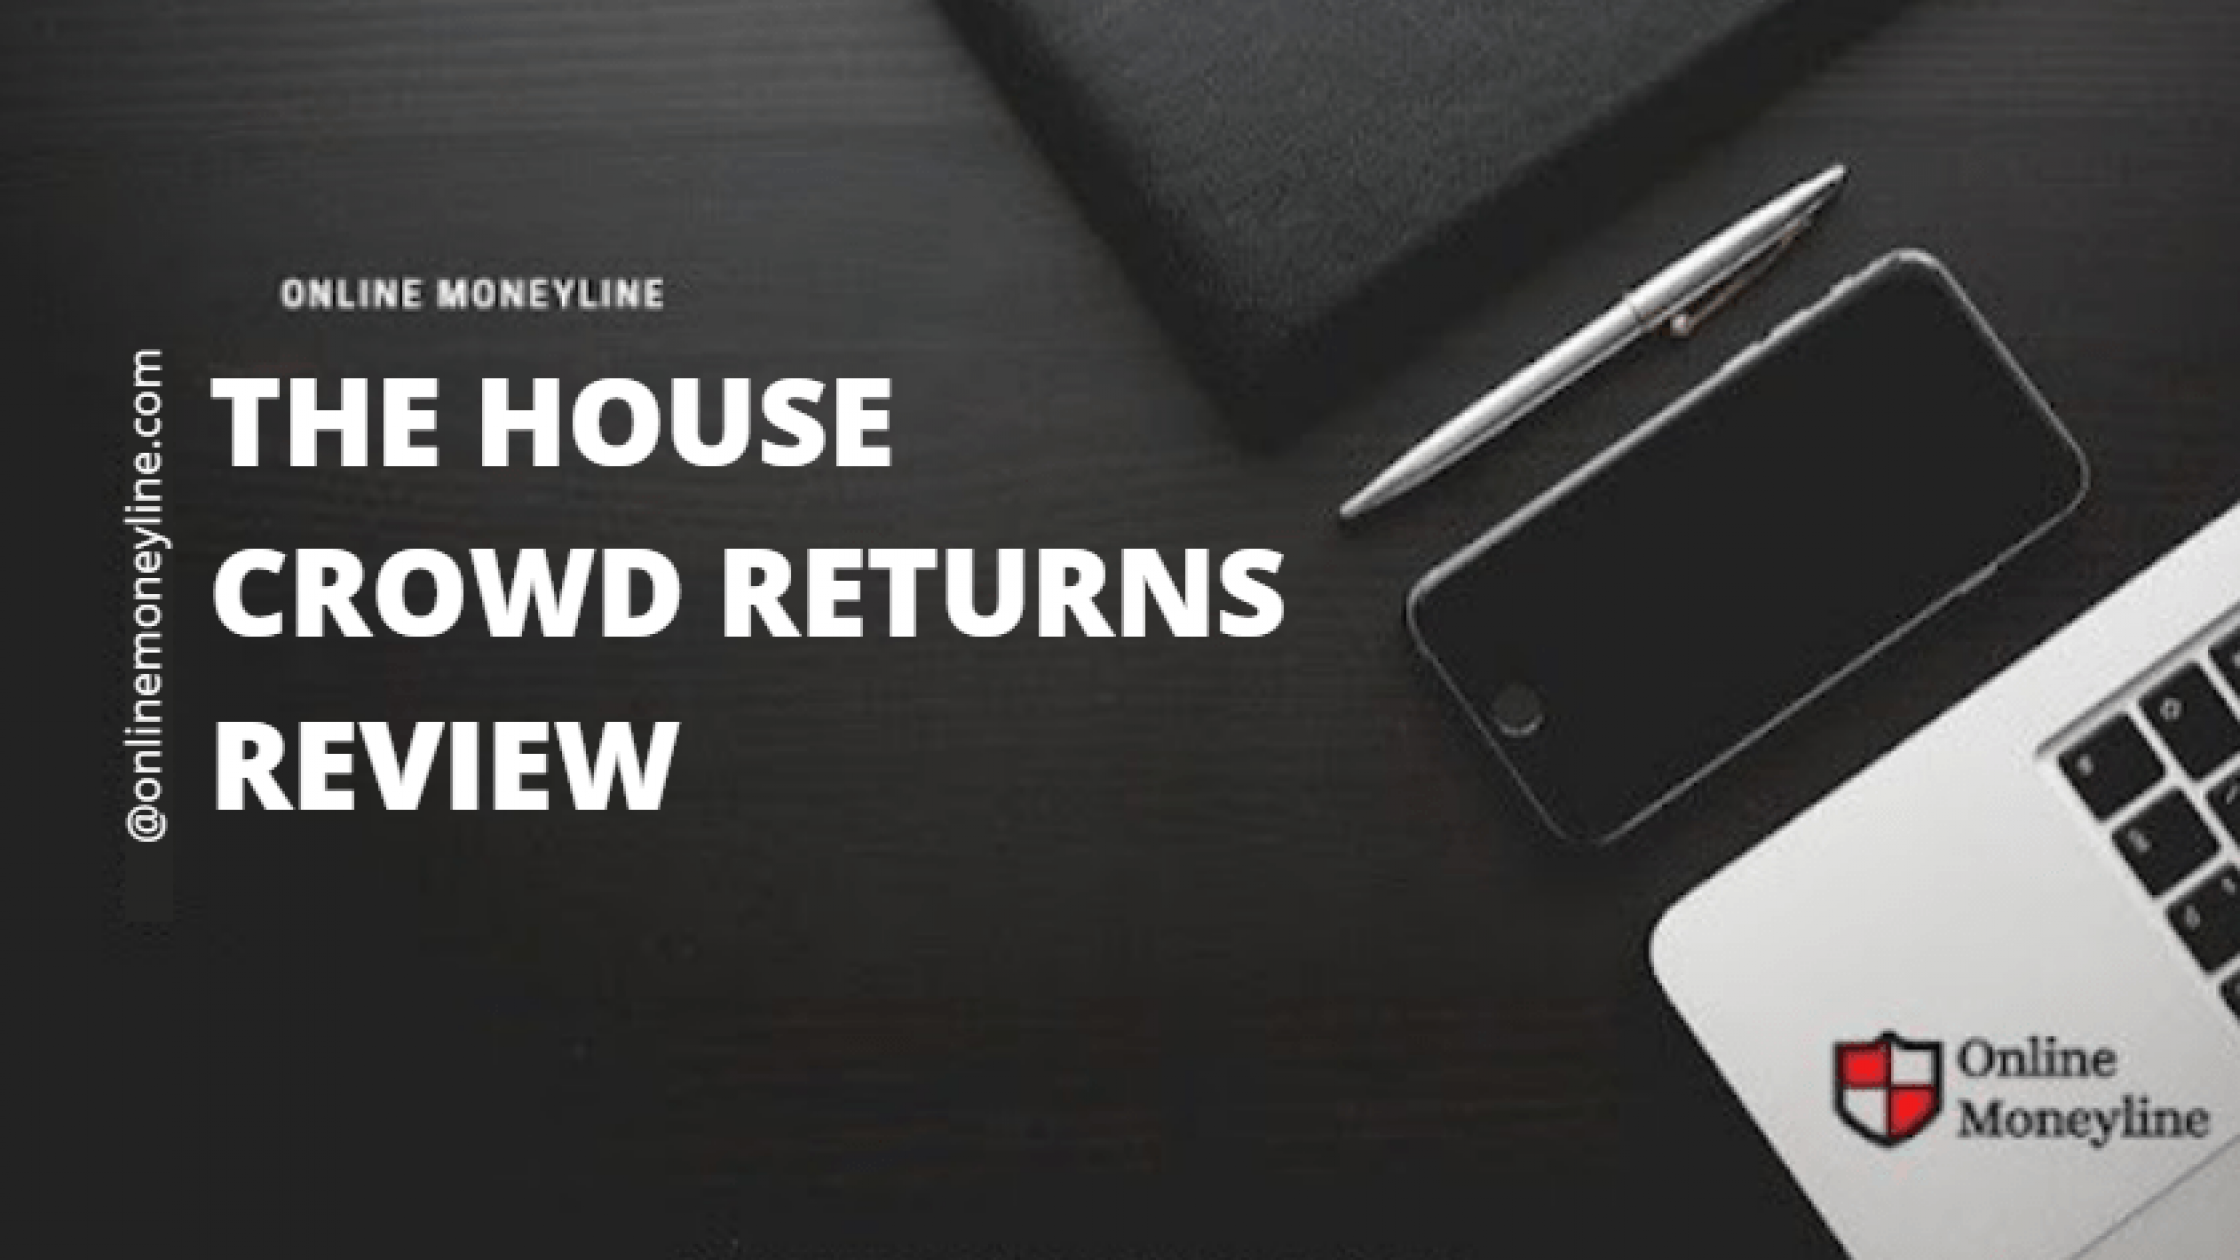 The House Crowd Returns Review